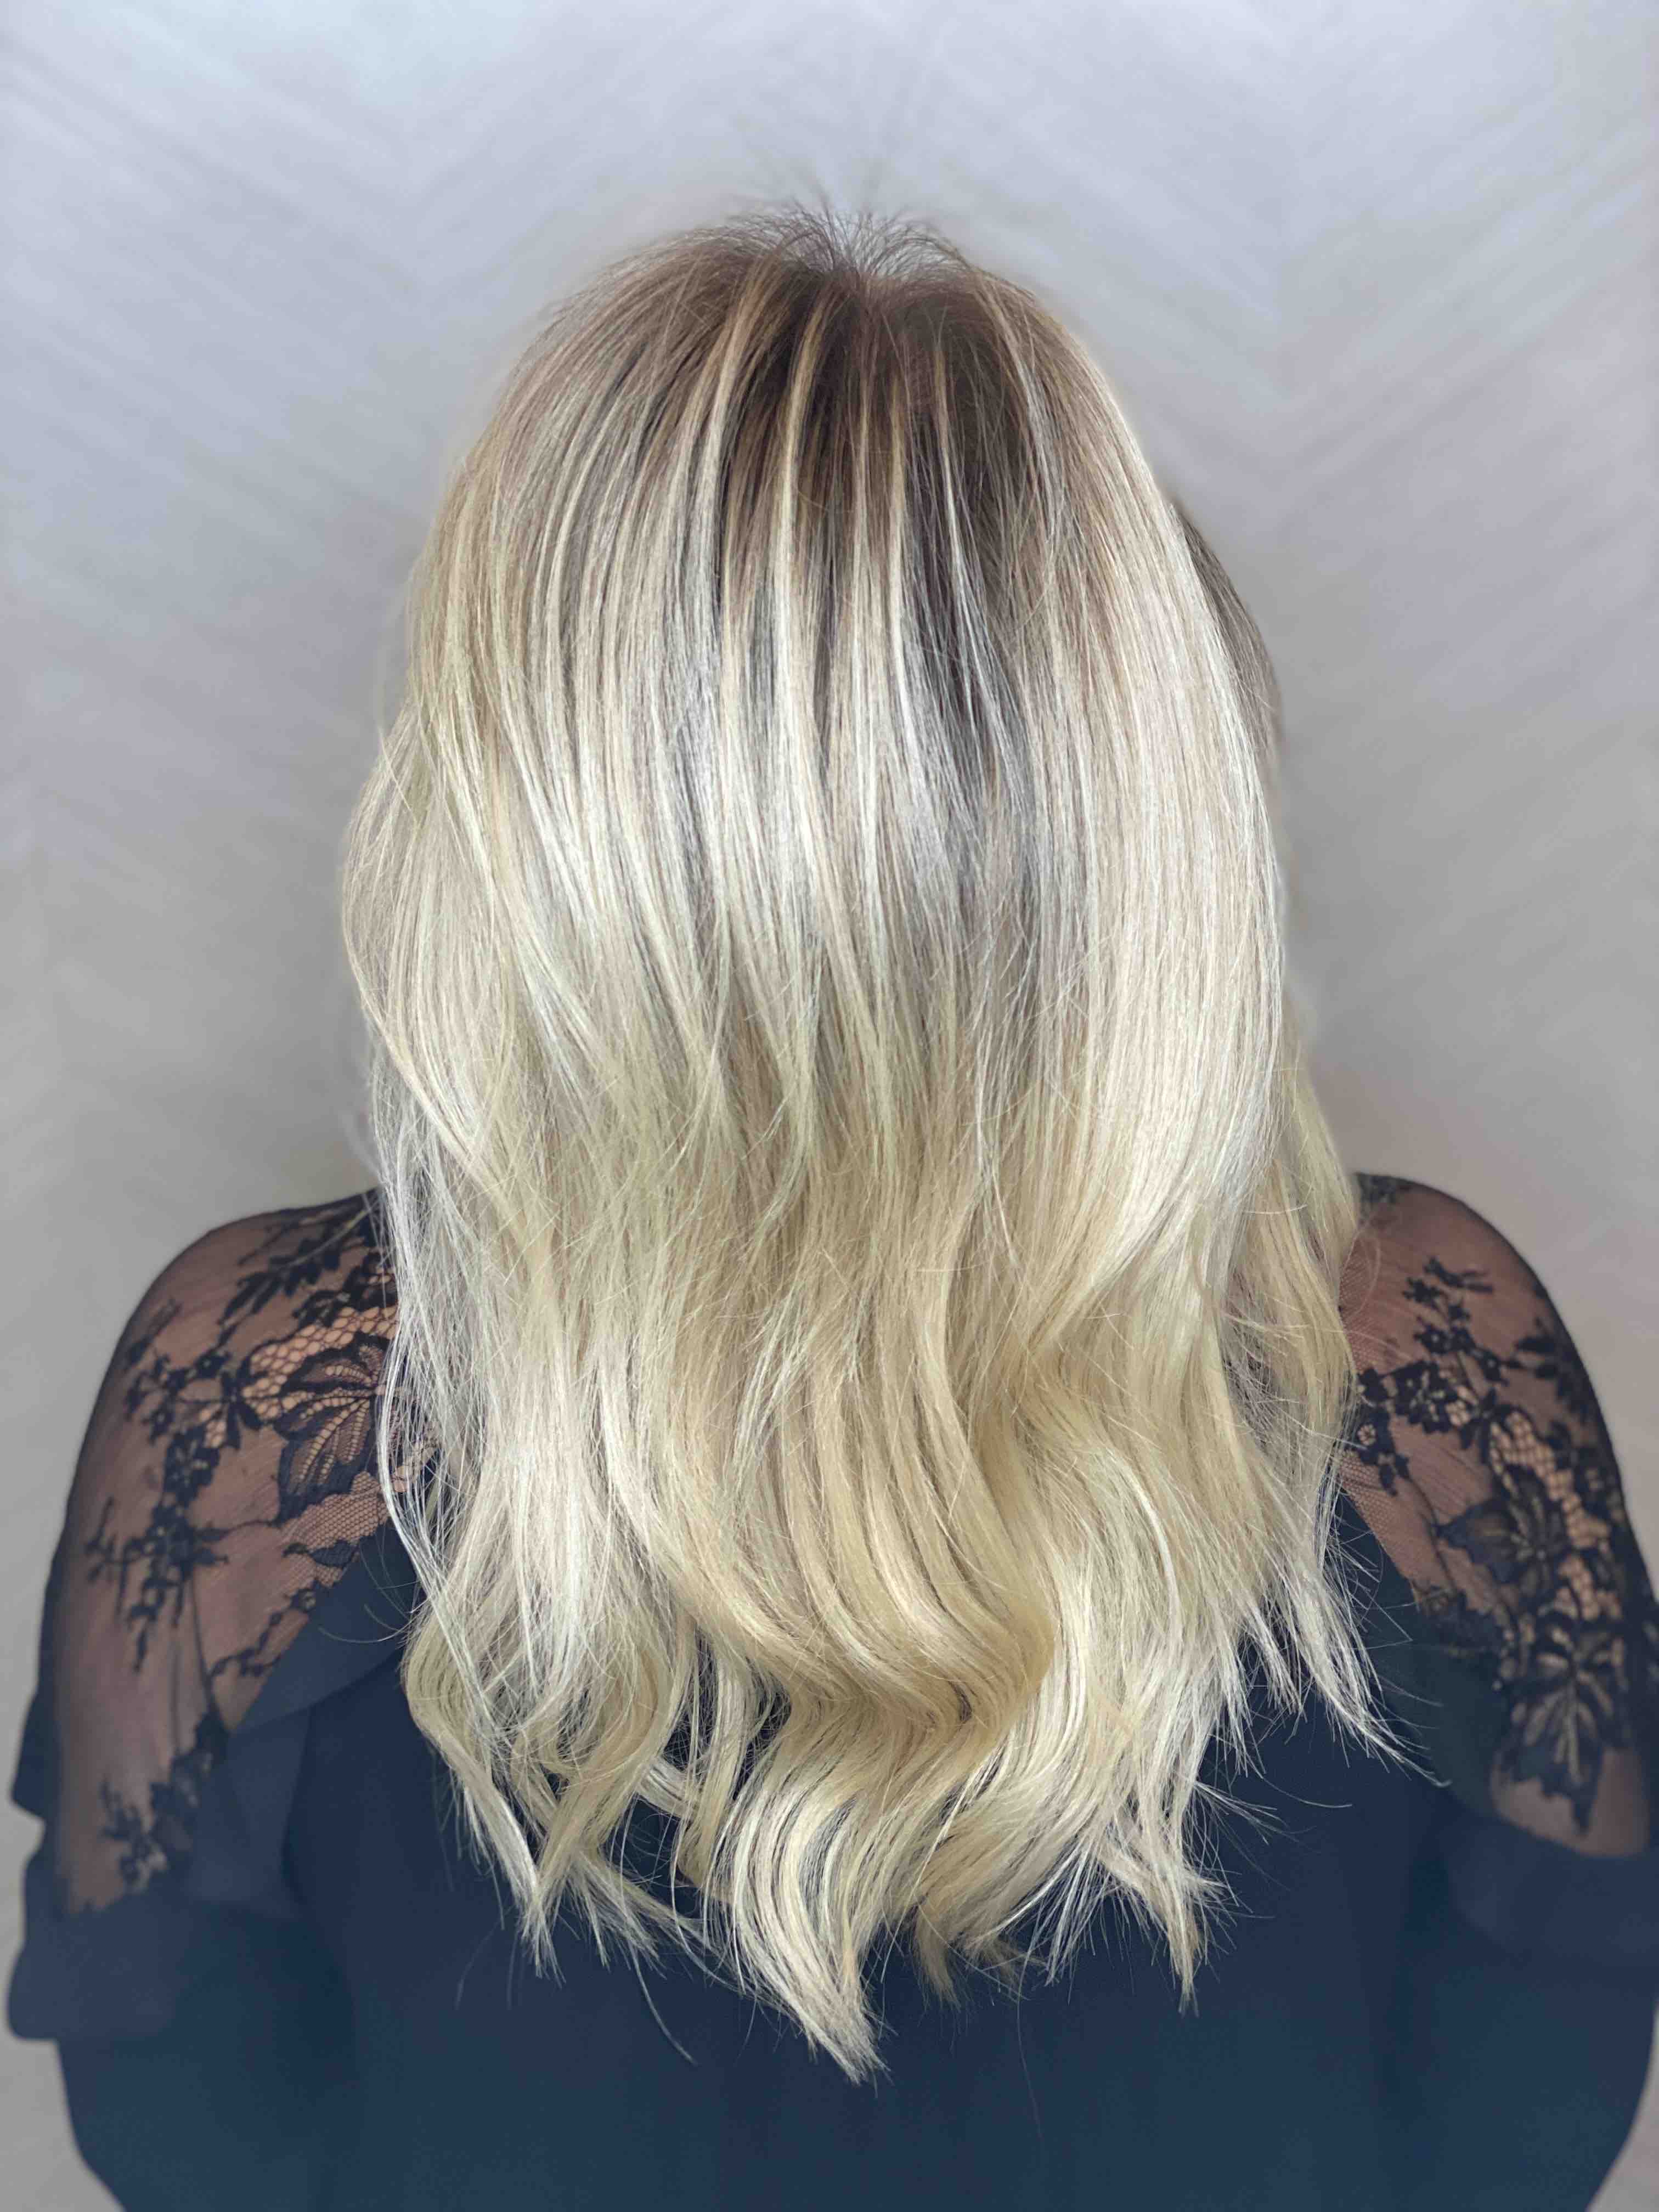 Full Foil Highlight And Blowdry